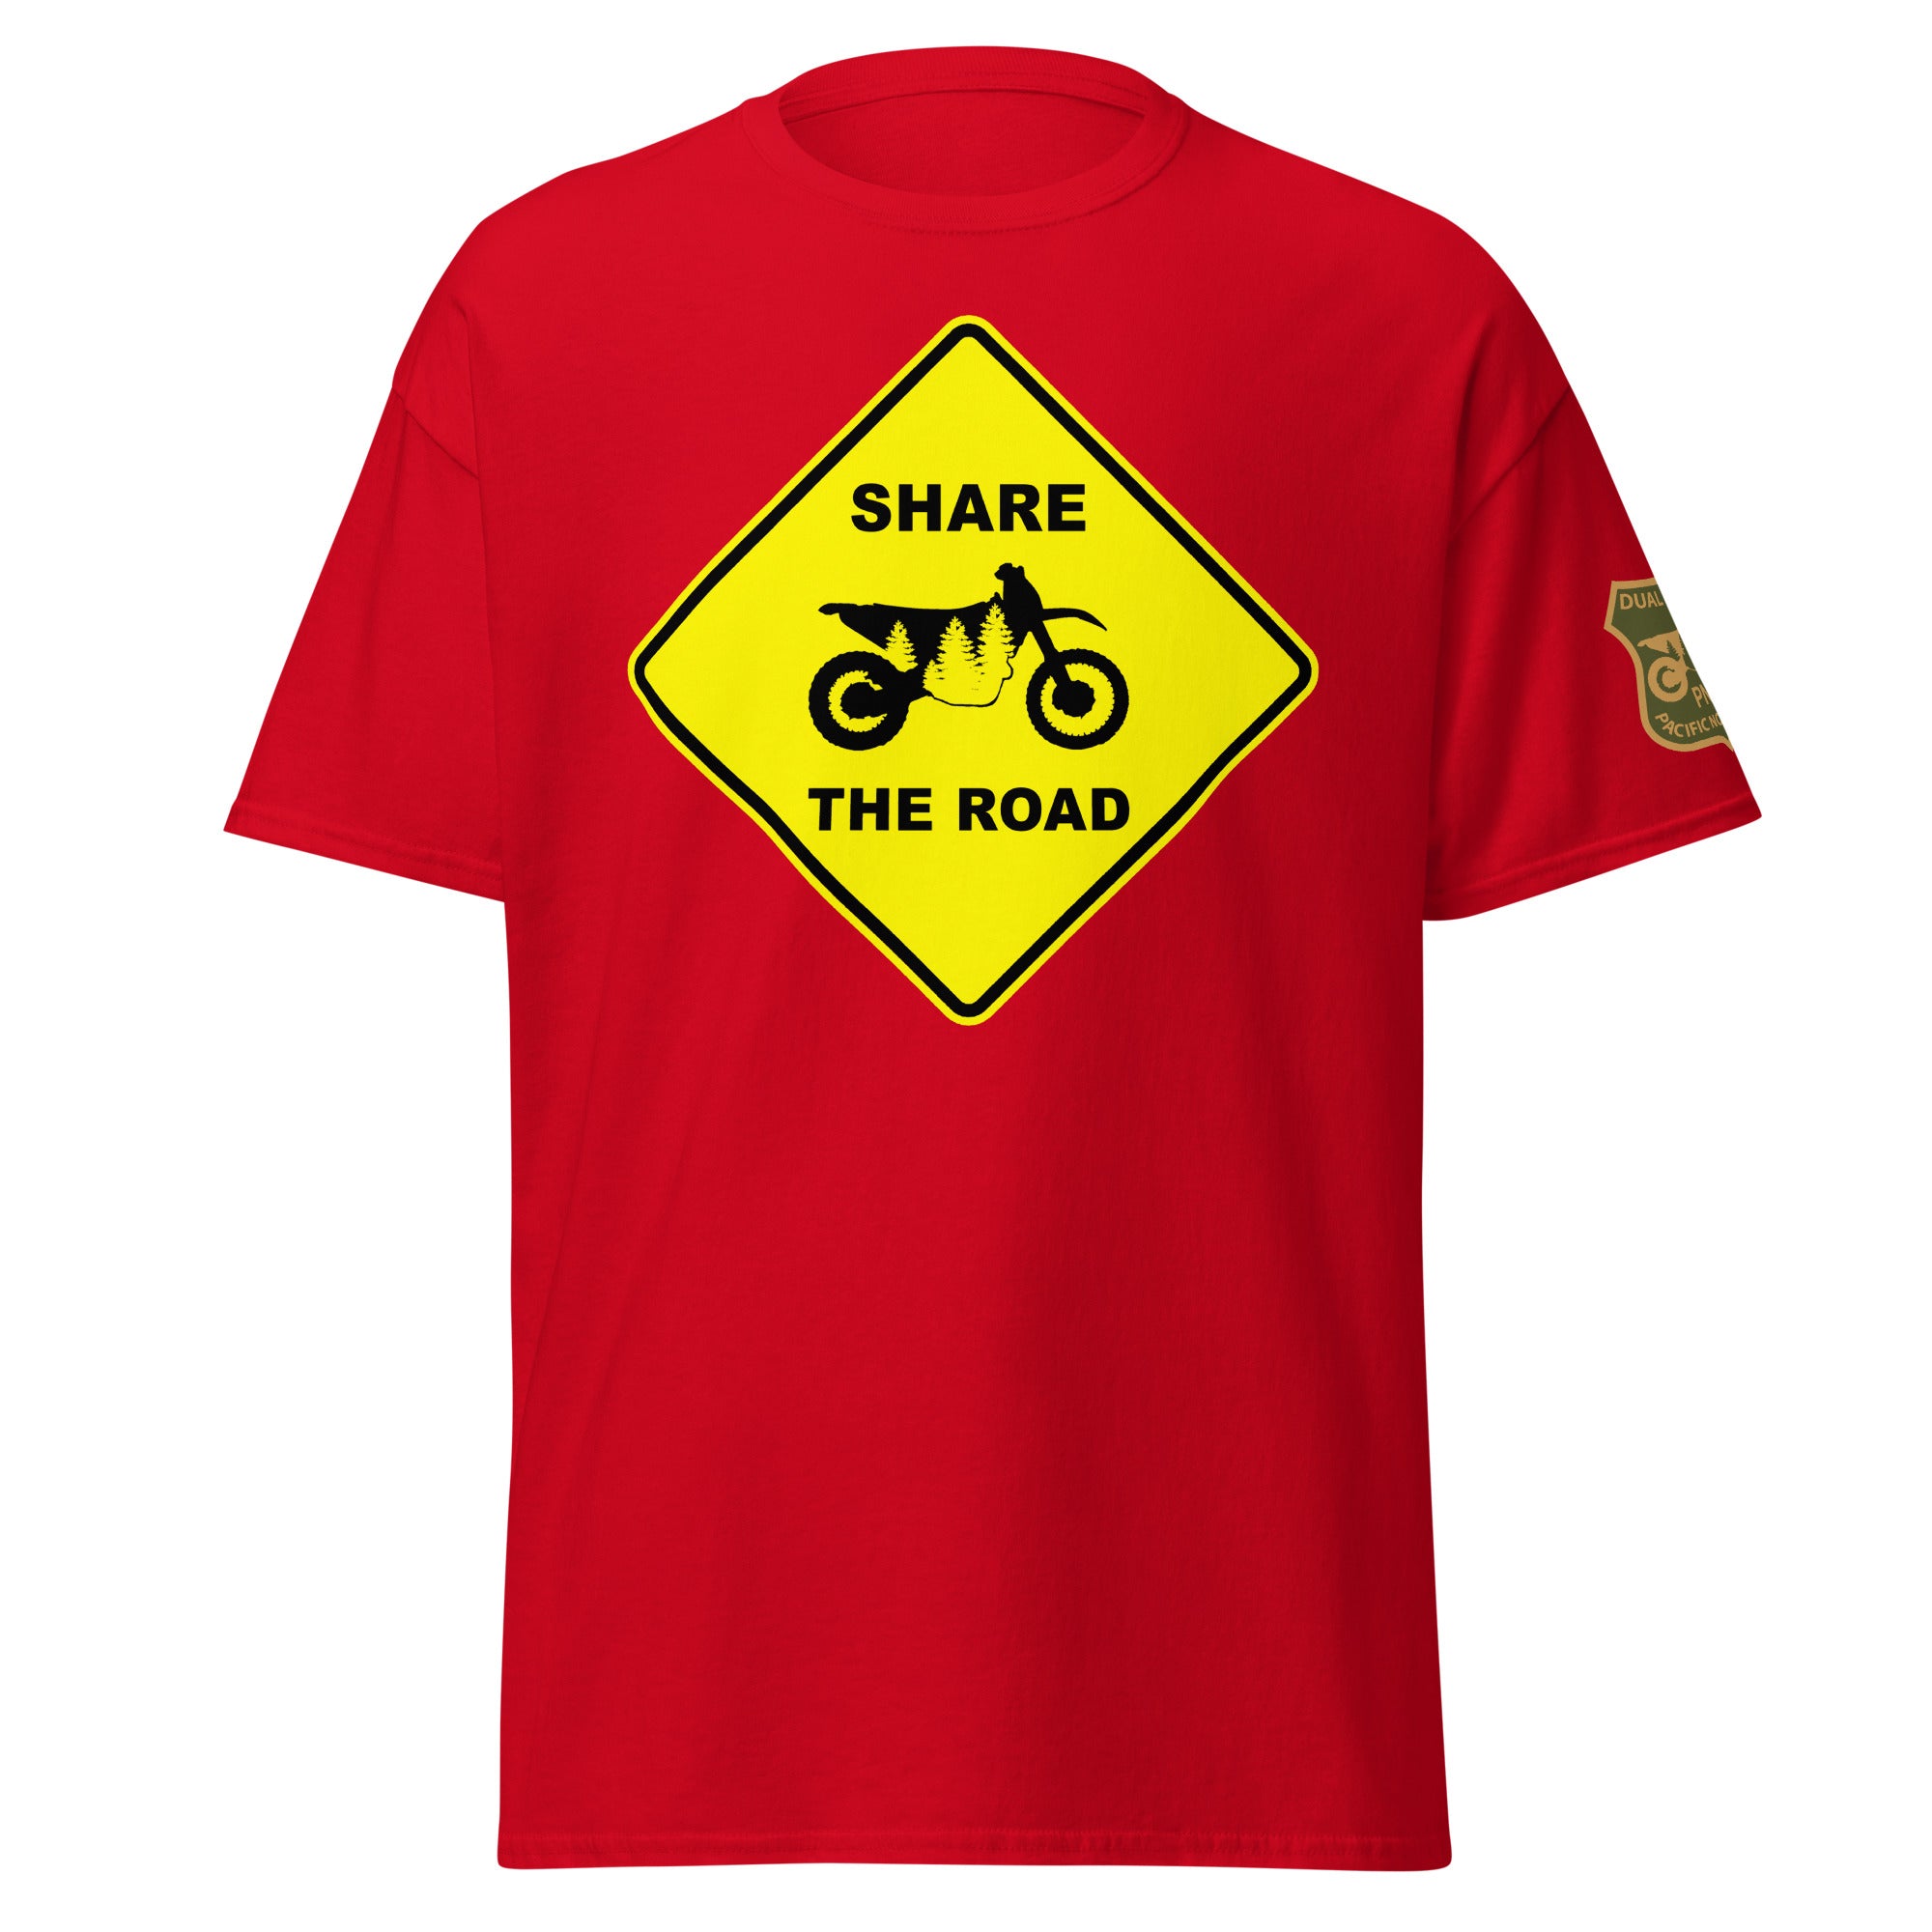 Share The Road Shirt, Classic